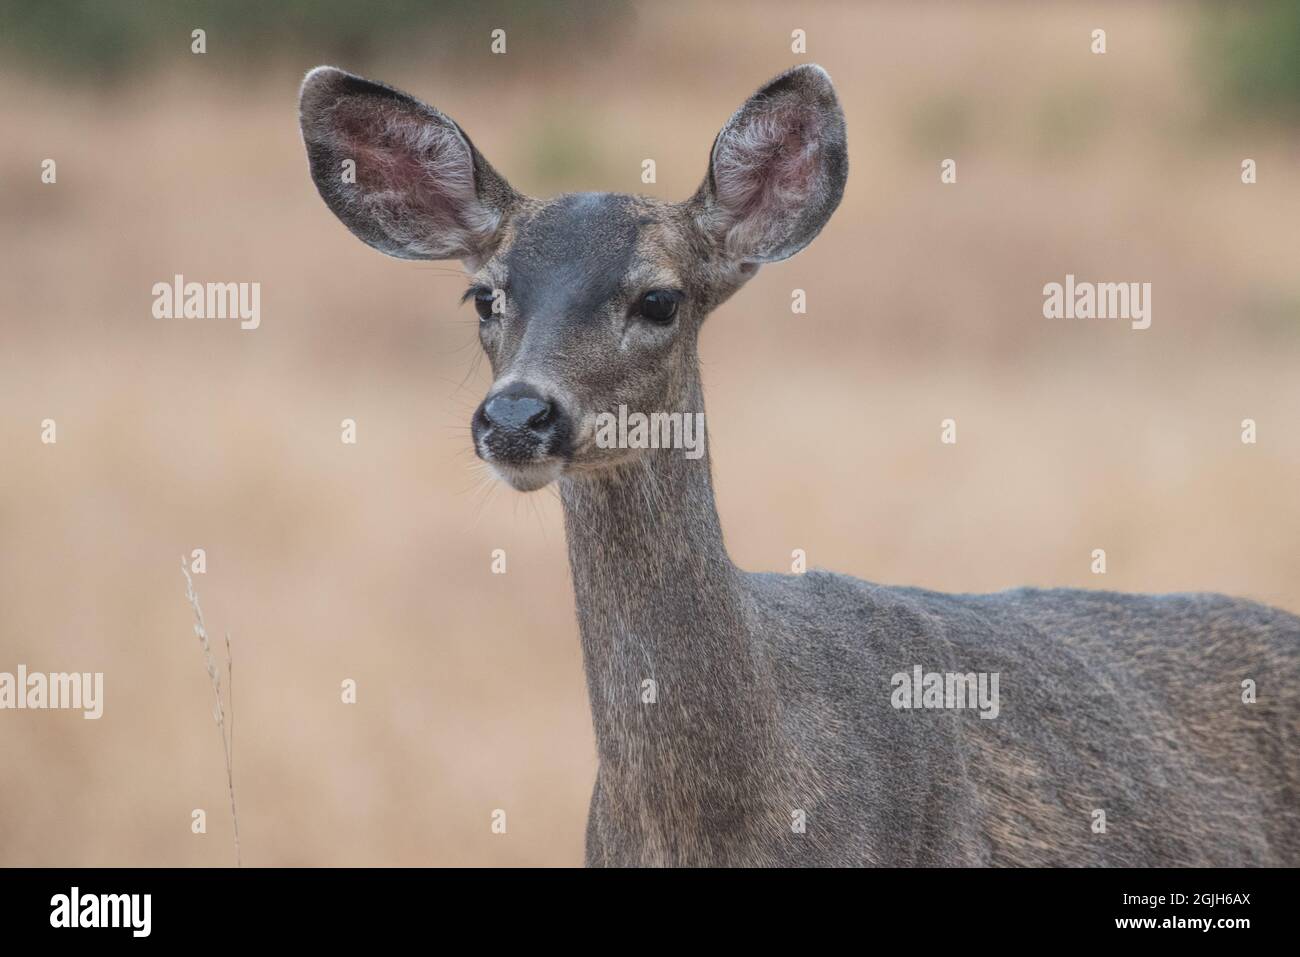 A black-tailed deer (Odocoileus hemionus columbianus) doe, considered a subspecies of mule deer - they are found in much of the Western USA. Stock Photo